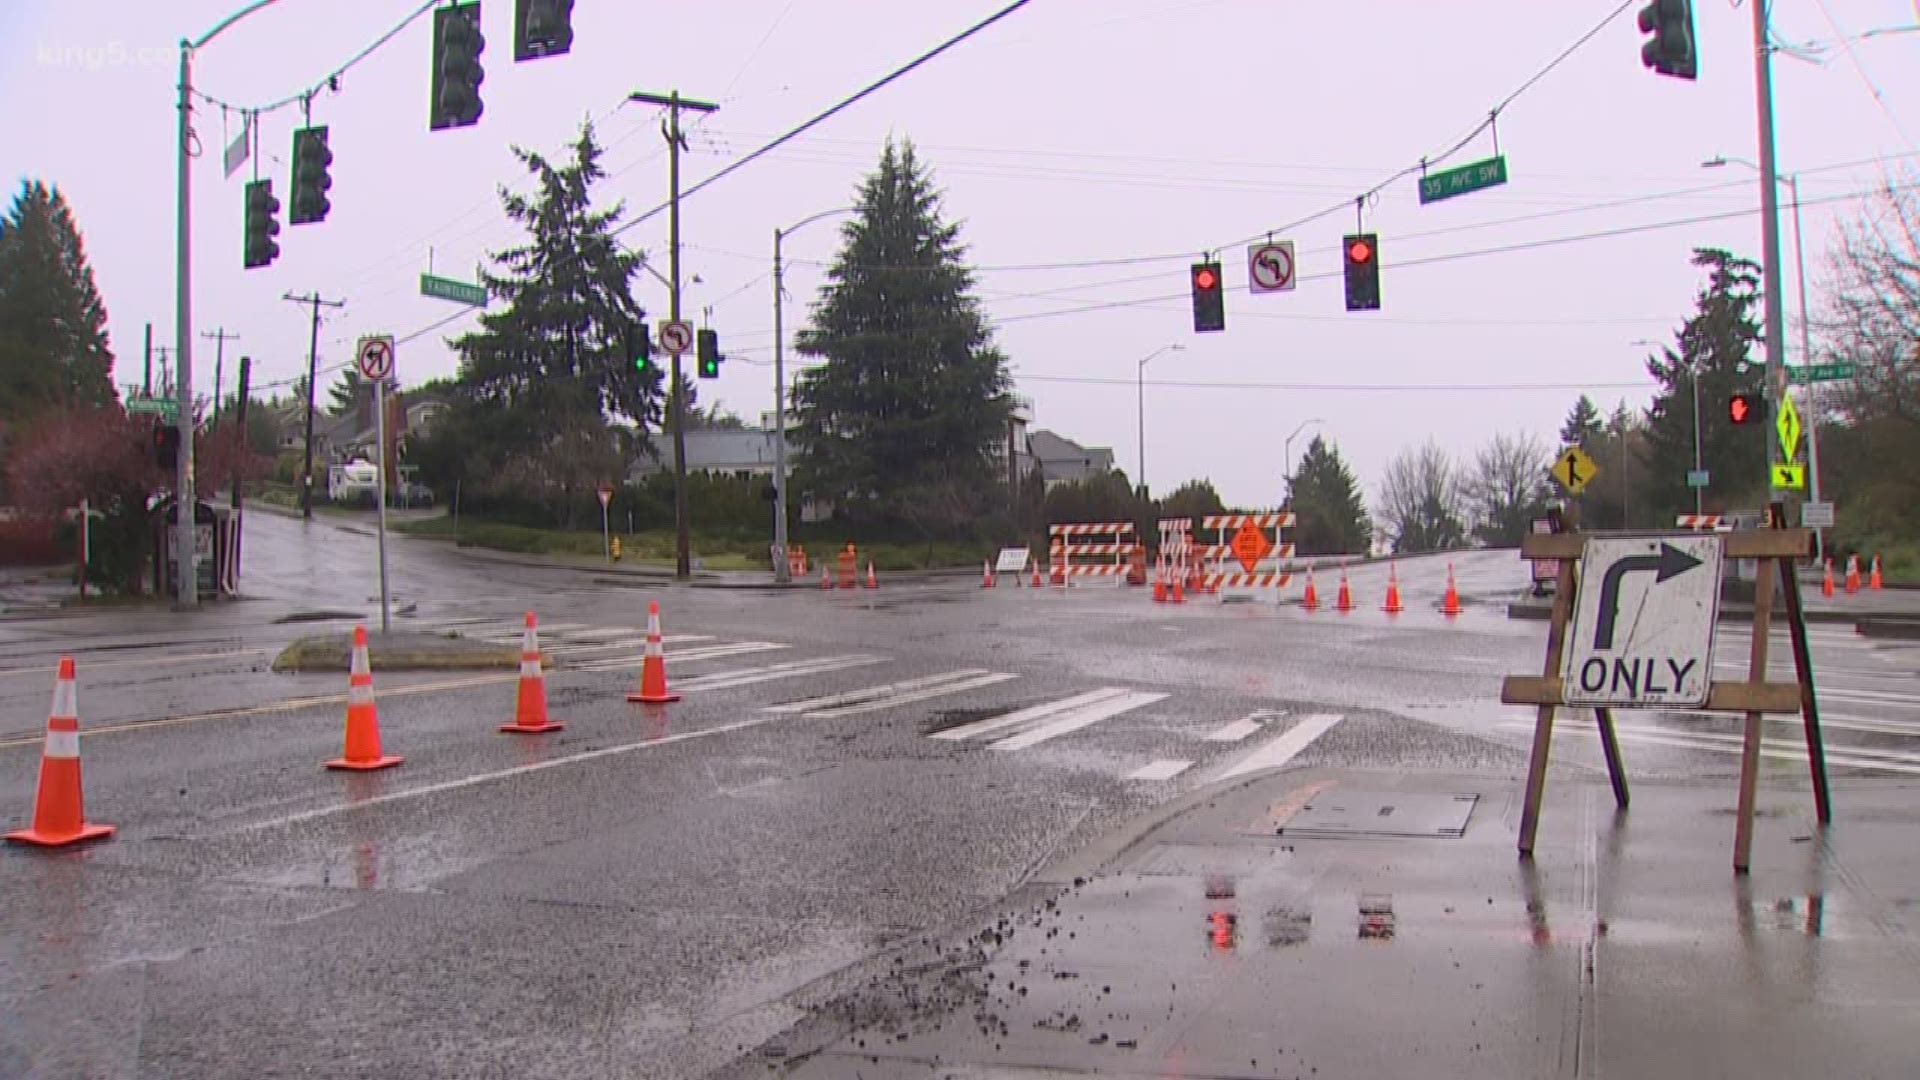 The West Seattle Bridge abruptly closed last week due to cracks, and officials say there is no timeline to reopen.